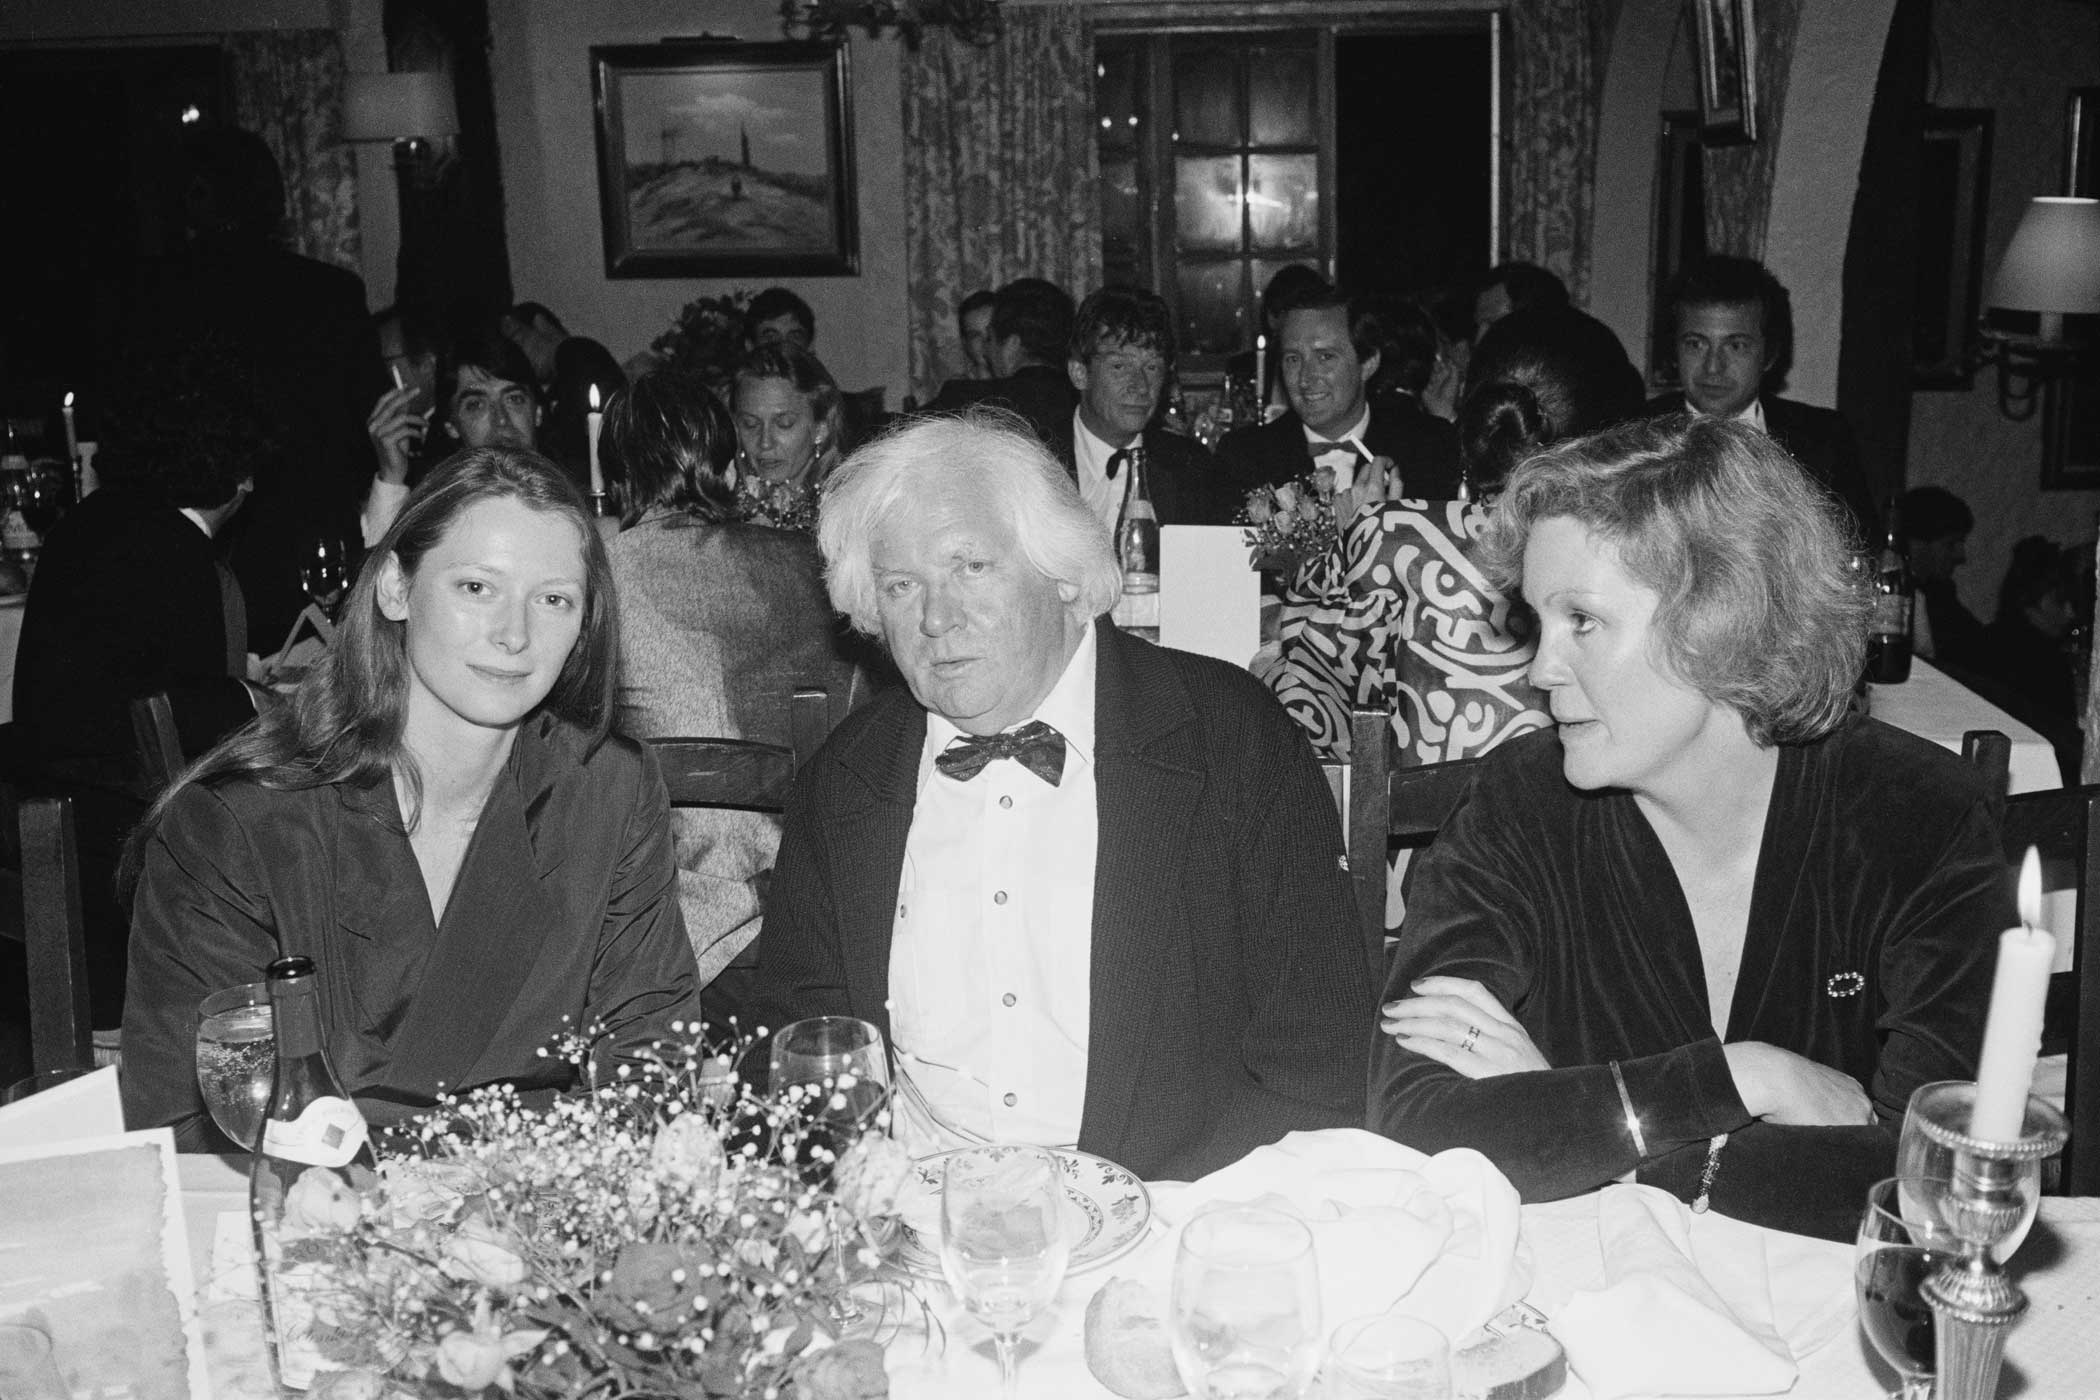 Tilda Swinton, left, and director Ken Russell are seen at the Cannes Film Festival to present their film Aria in Cannes, France in May 1987.